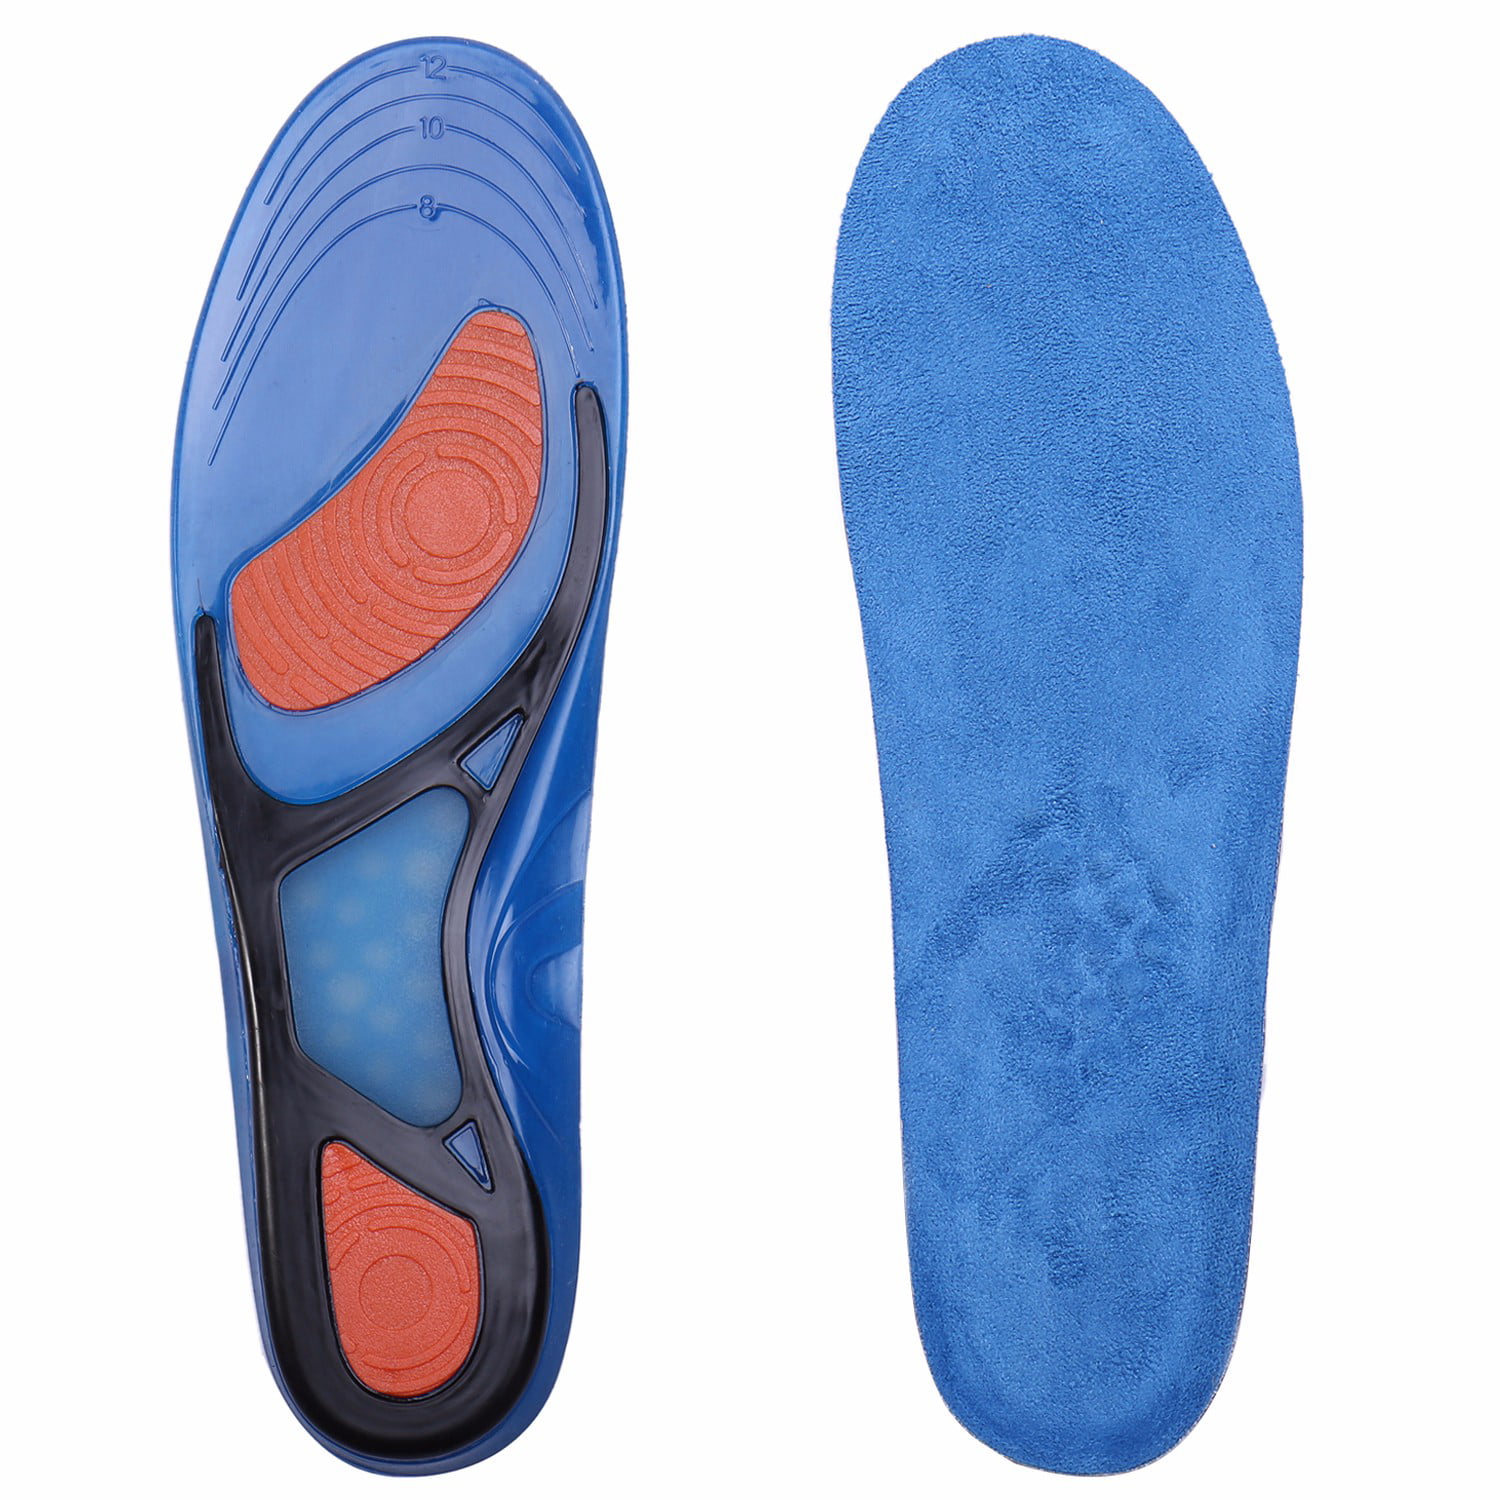 CFR Sport Insoles, Silicone Insoles Shoes Pads Sport Running Cushion ...